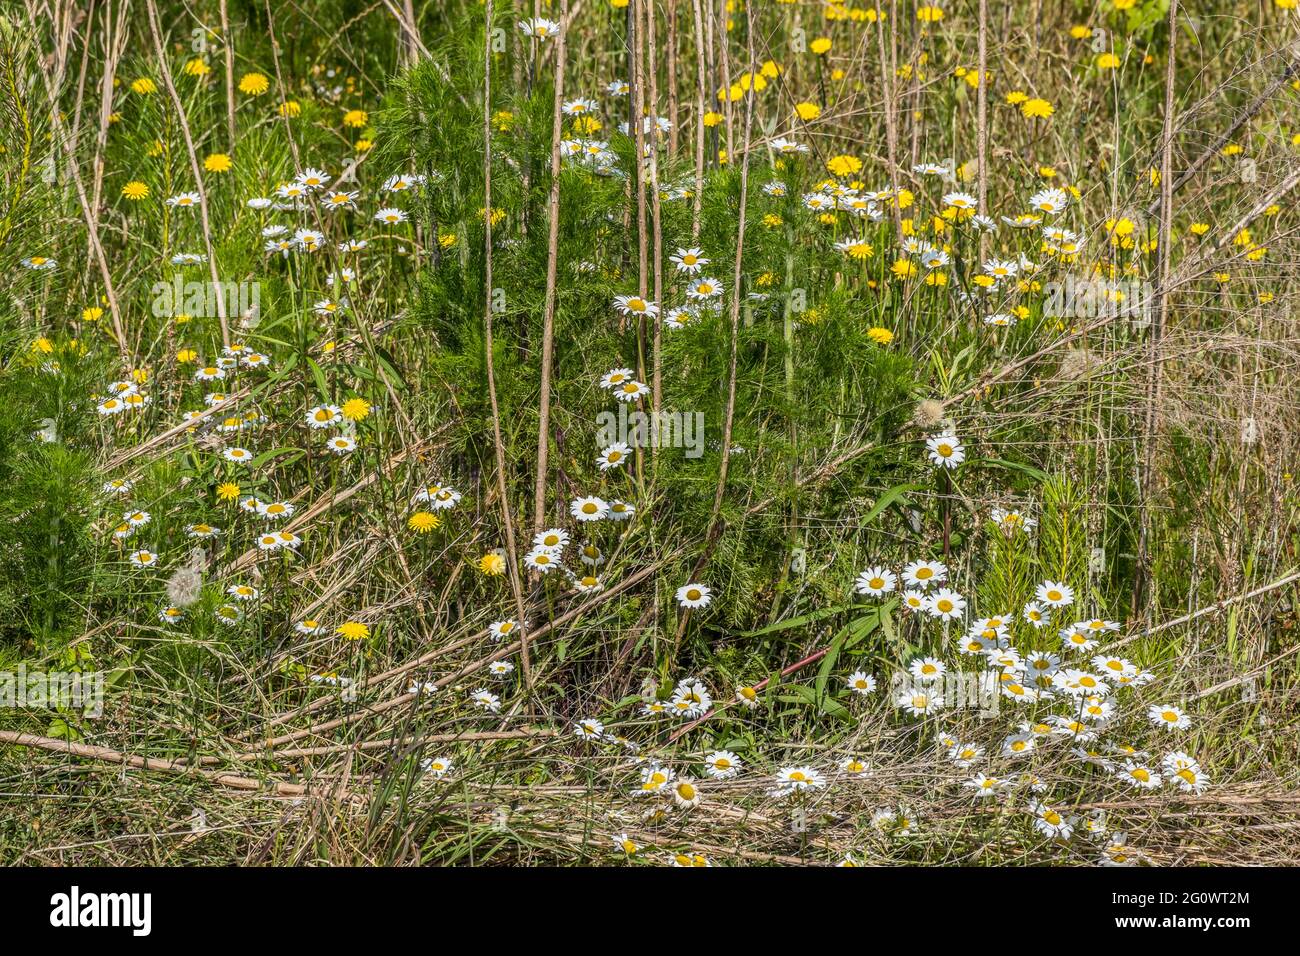 Grouping of white daisies and yellow dandelions combined together growing between the tall grasses in the field on a sunny day in springtime Stock Photo